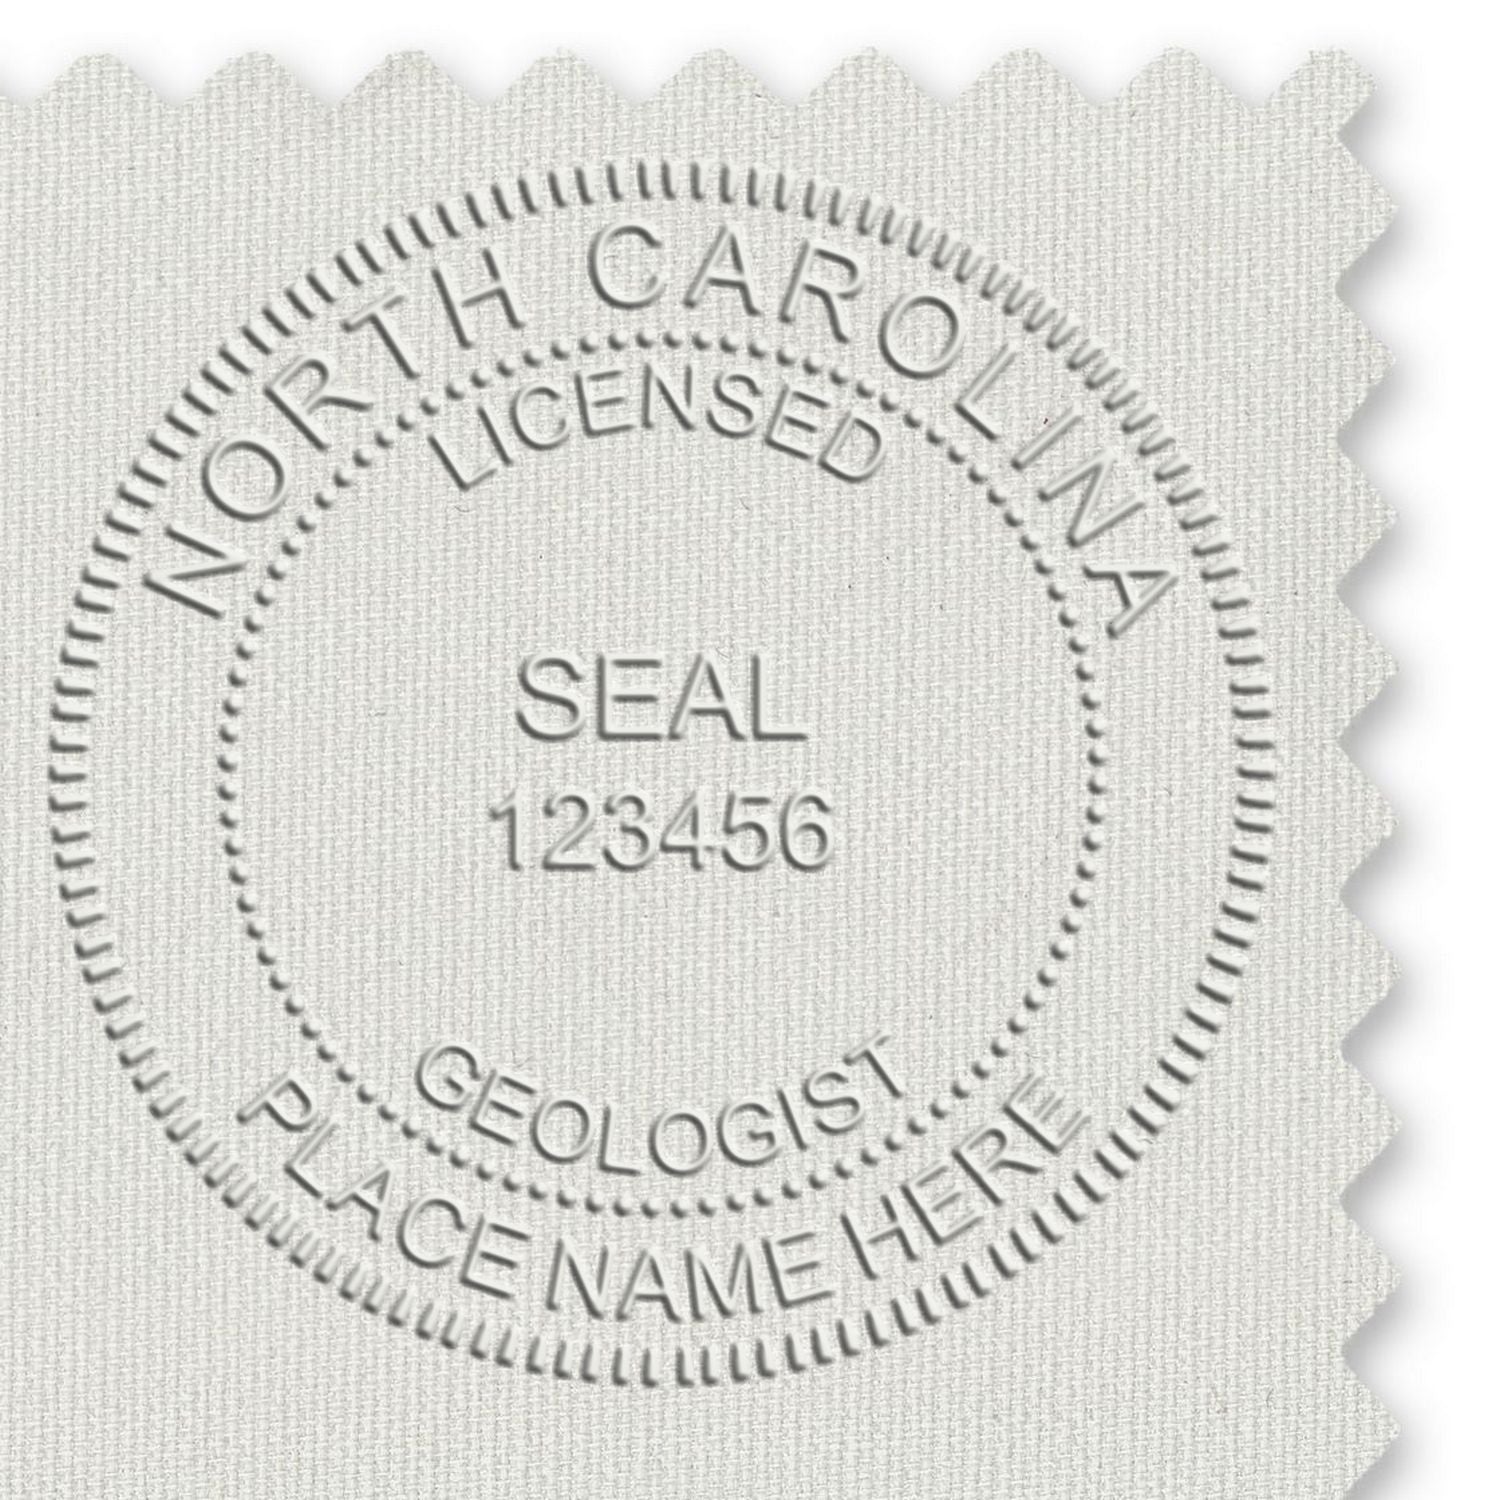 The main image for the Heavy Duty Cast Iron North Carolina Geologist Seal Embosser depicting a sample of the imprint and imprint sample